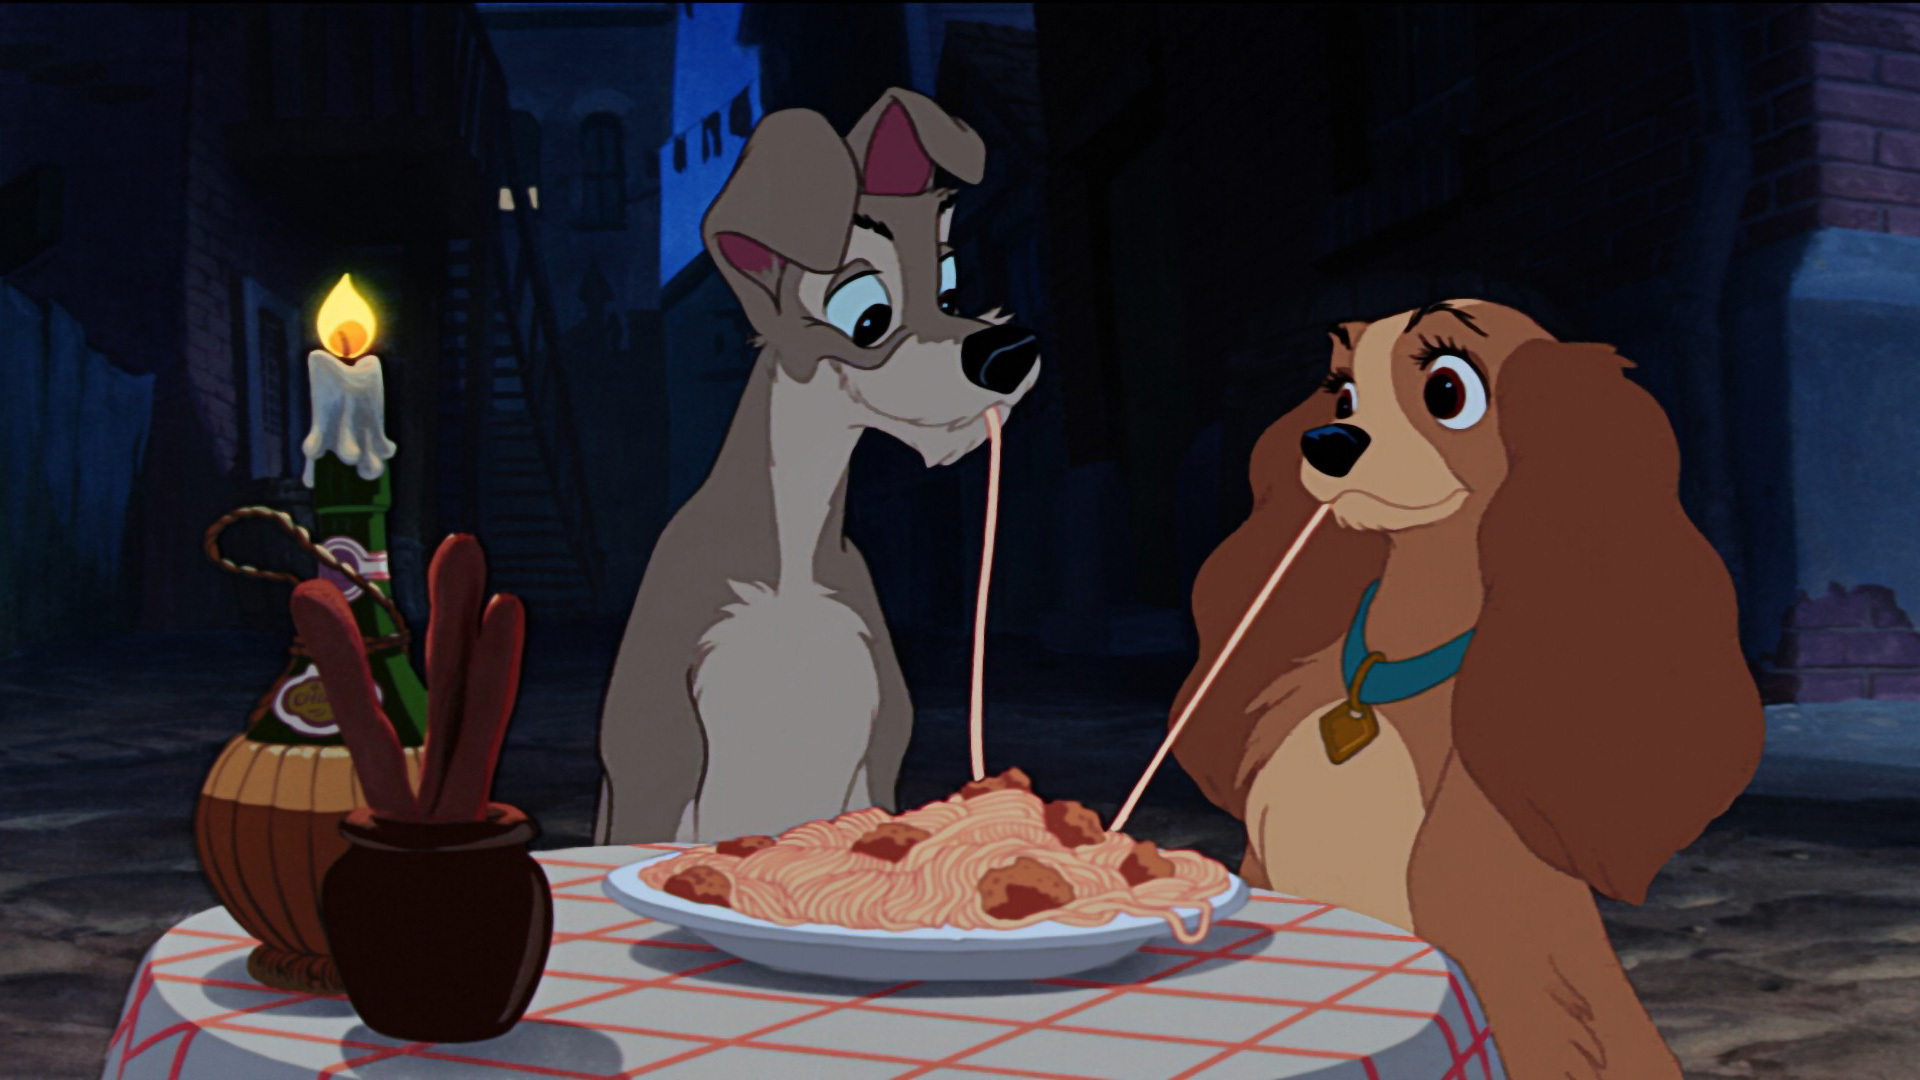 <p>Is it possible for two people to share a plate of spaghetti without someone referencing the 1955 Disney animated film “Lady and the Tramp”? We submit that no, it is not possible, and we are just fine with that. After all, “Lady and the Tramp” is a classic film, and that scene has since become iconic. “Lady and the Tramp” also has a timeless quality, making most fans forget the film is more than 60 years old.</p><p>You may also like: <a href='https://www.yardbarker.com/entertainment/articles/the_21_best_horror_movies_of_the_21st_century_so_far_091323/s1__37979432'>The 21 best horror movies of the 21st century (so far)</a></p>